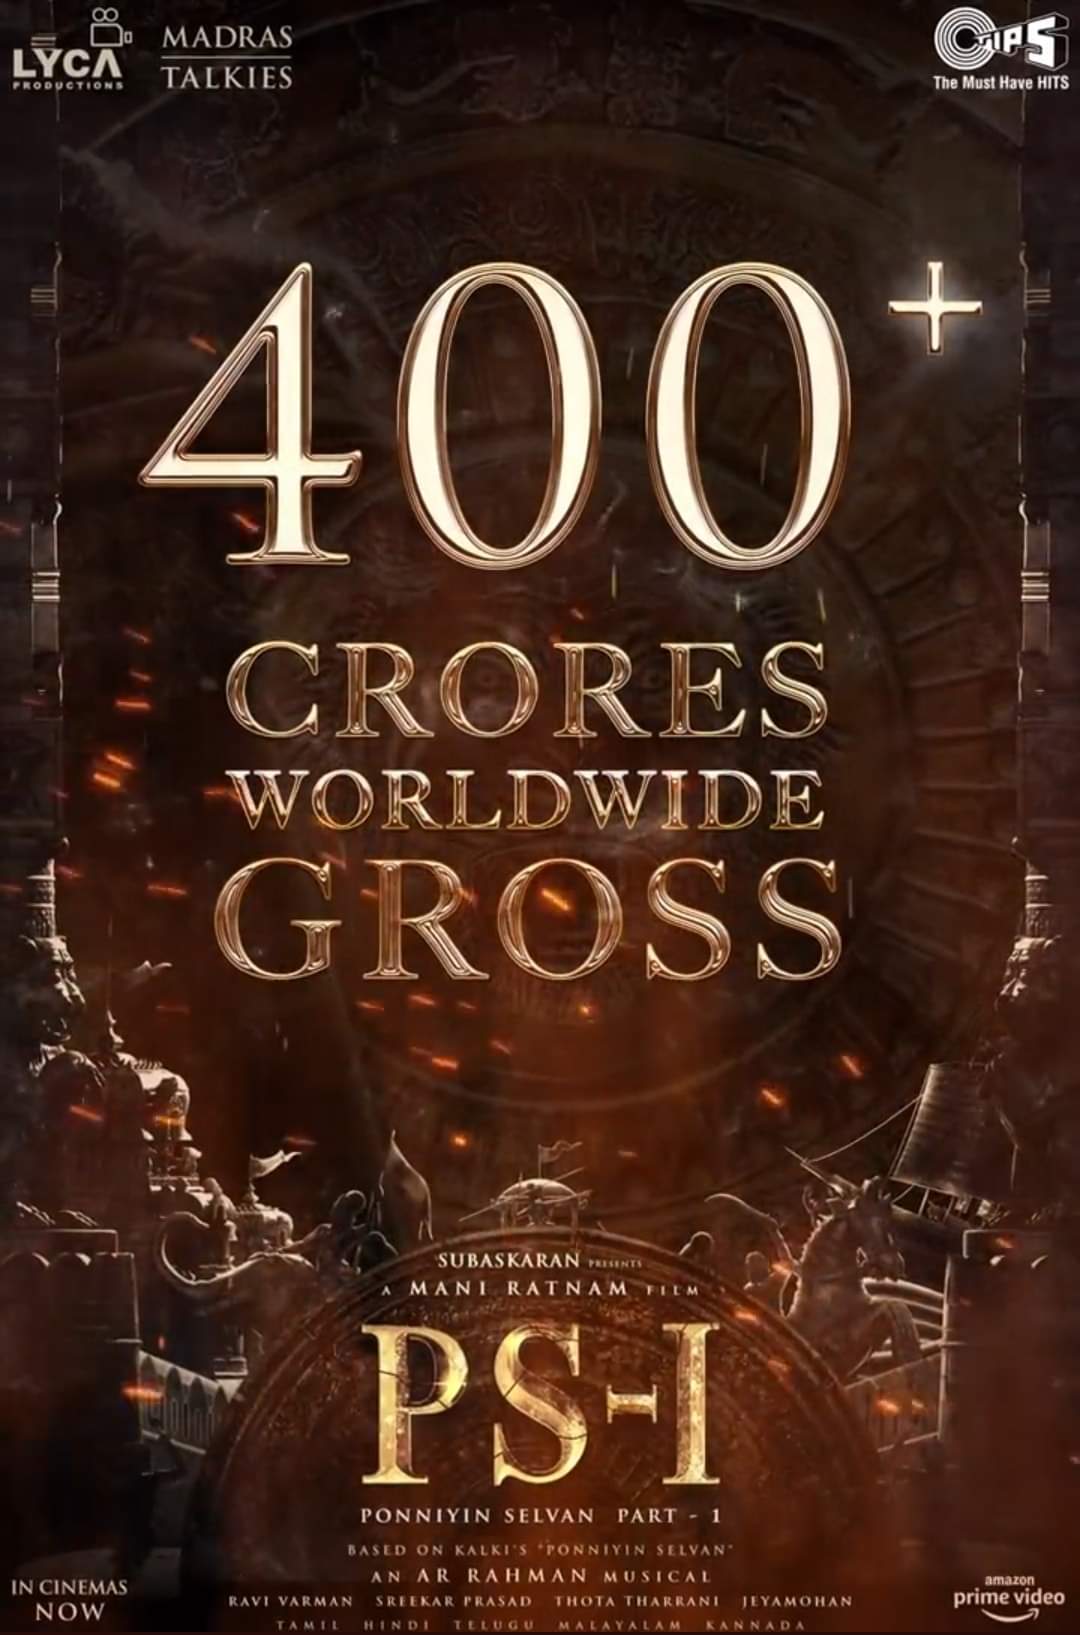 Ponniyin Selvan PS1 Crossed 400 Crore Box Office Collection